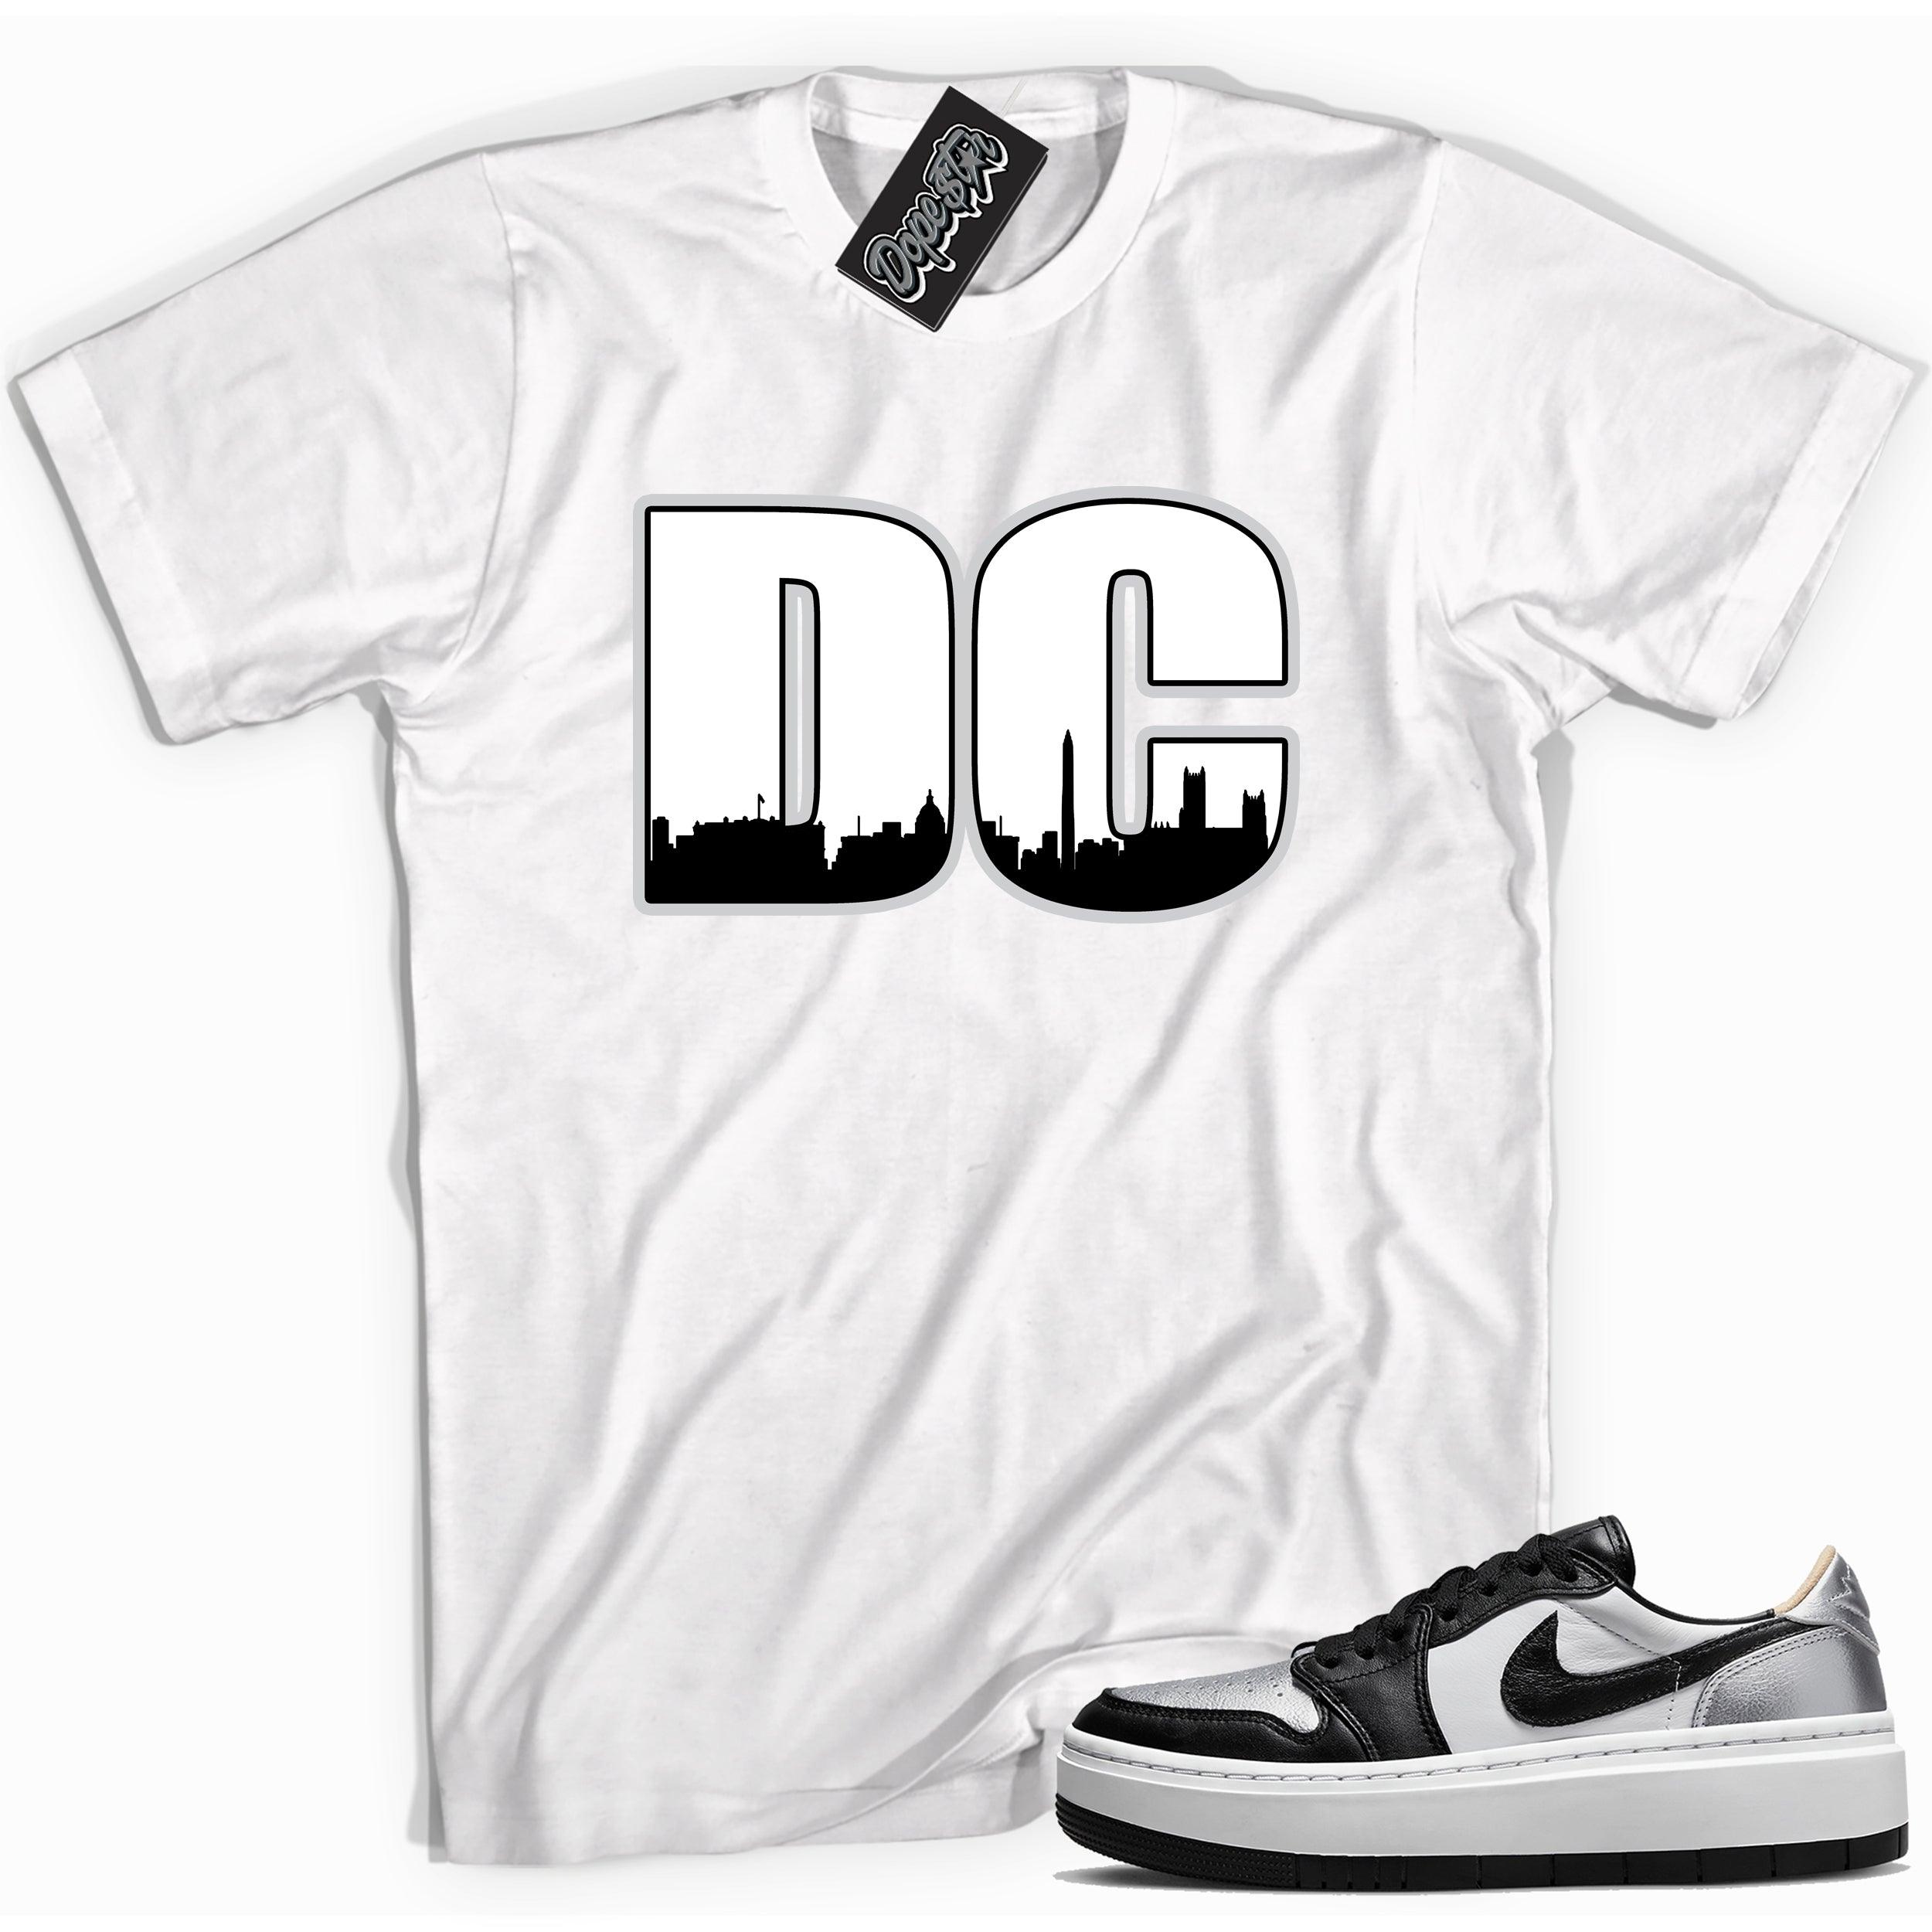 Cool white graphic tee with 'DC' print, that perfectly matches Air Jordan 1 Elevate Low SE Silver Toe sneakers.